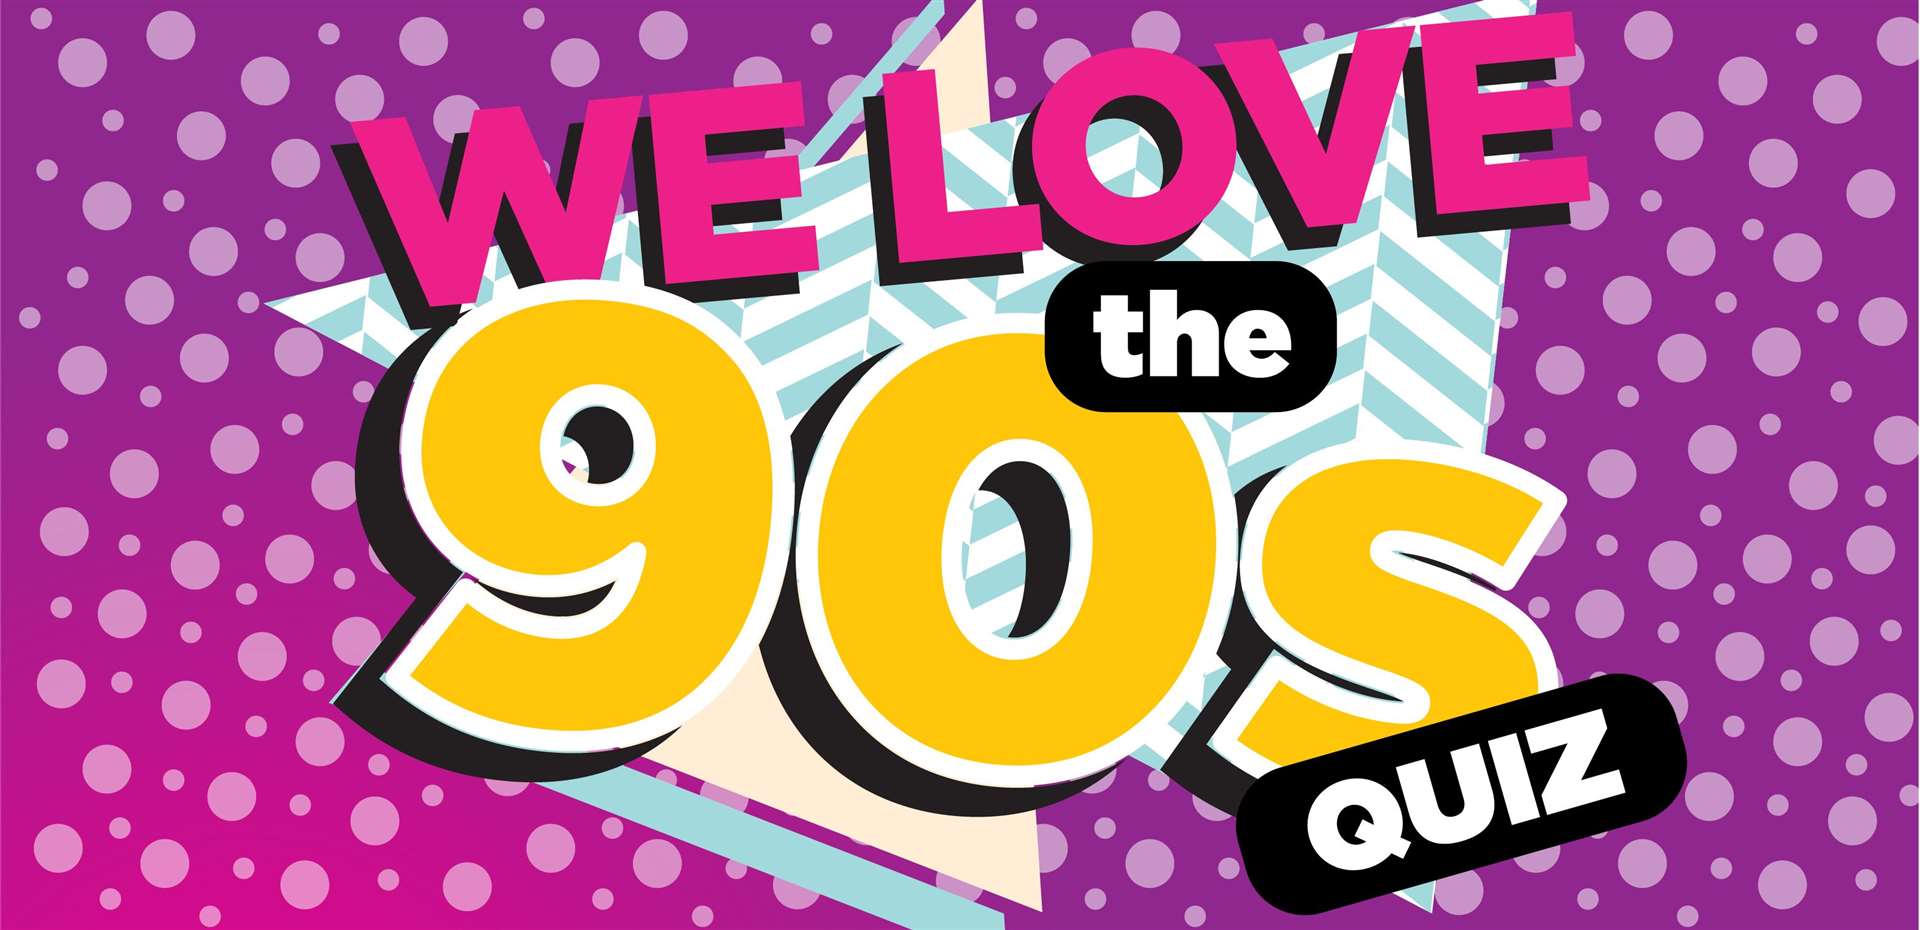 Test your knowledge of the 90s with our We Love the 90s quiz